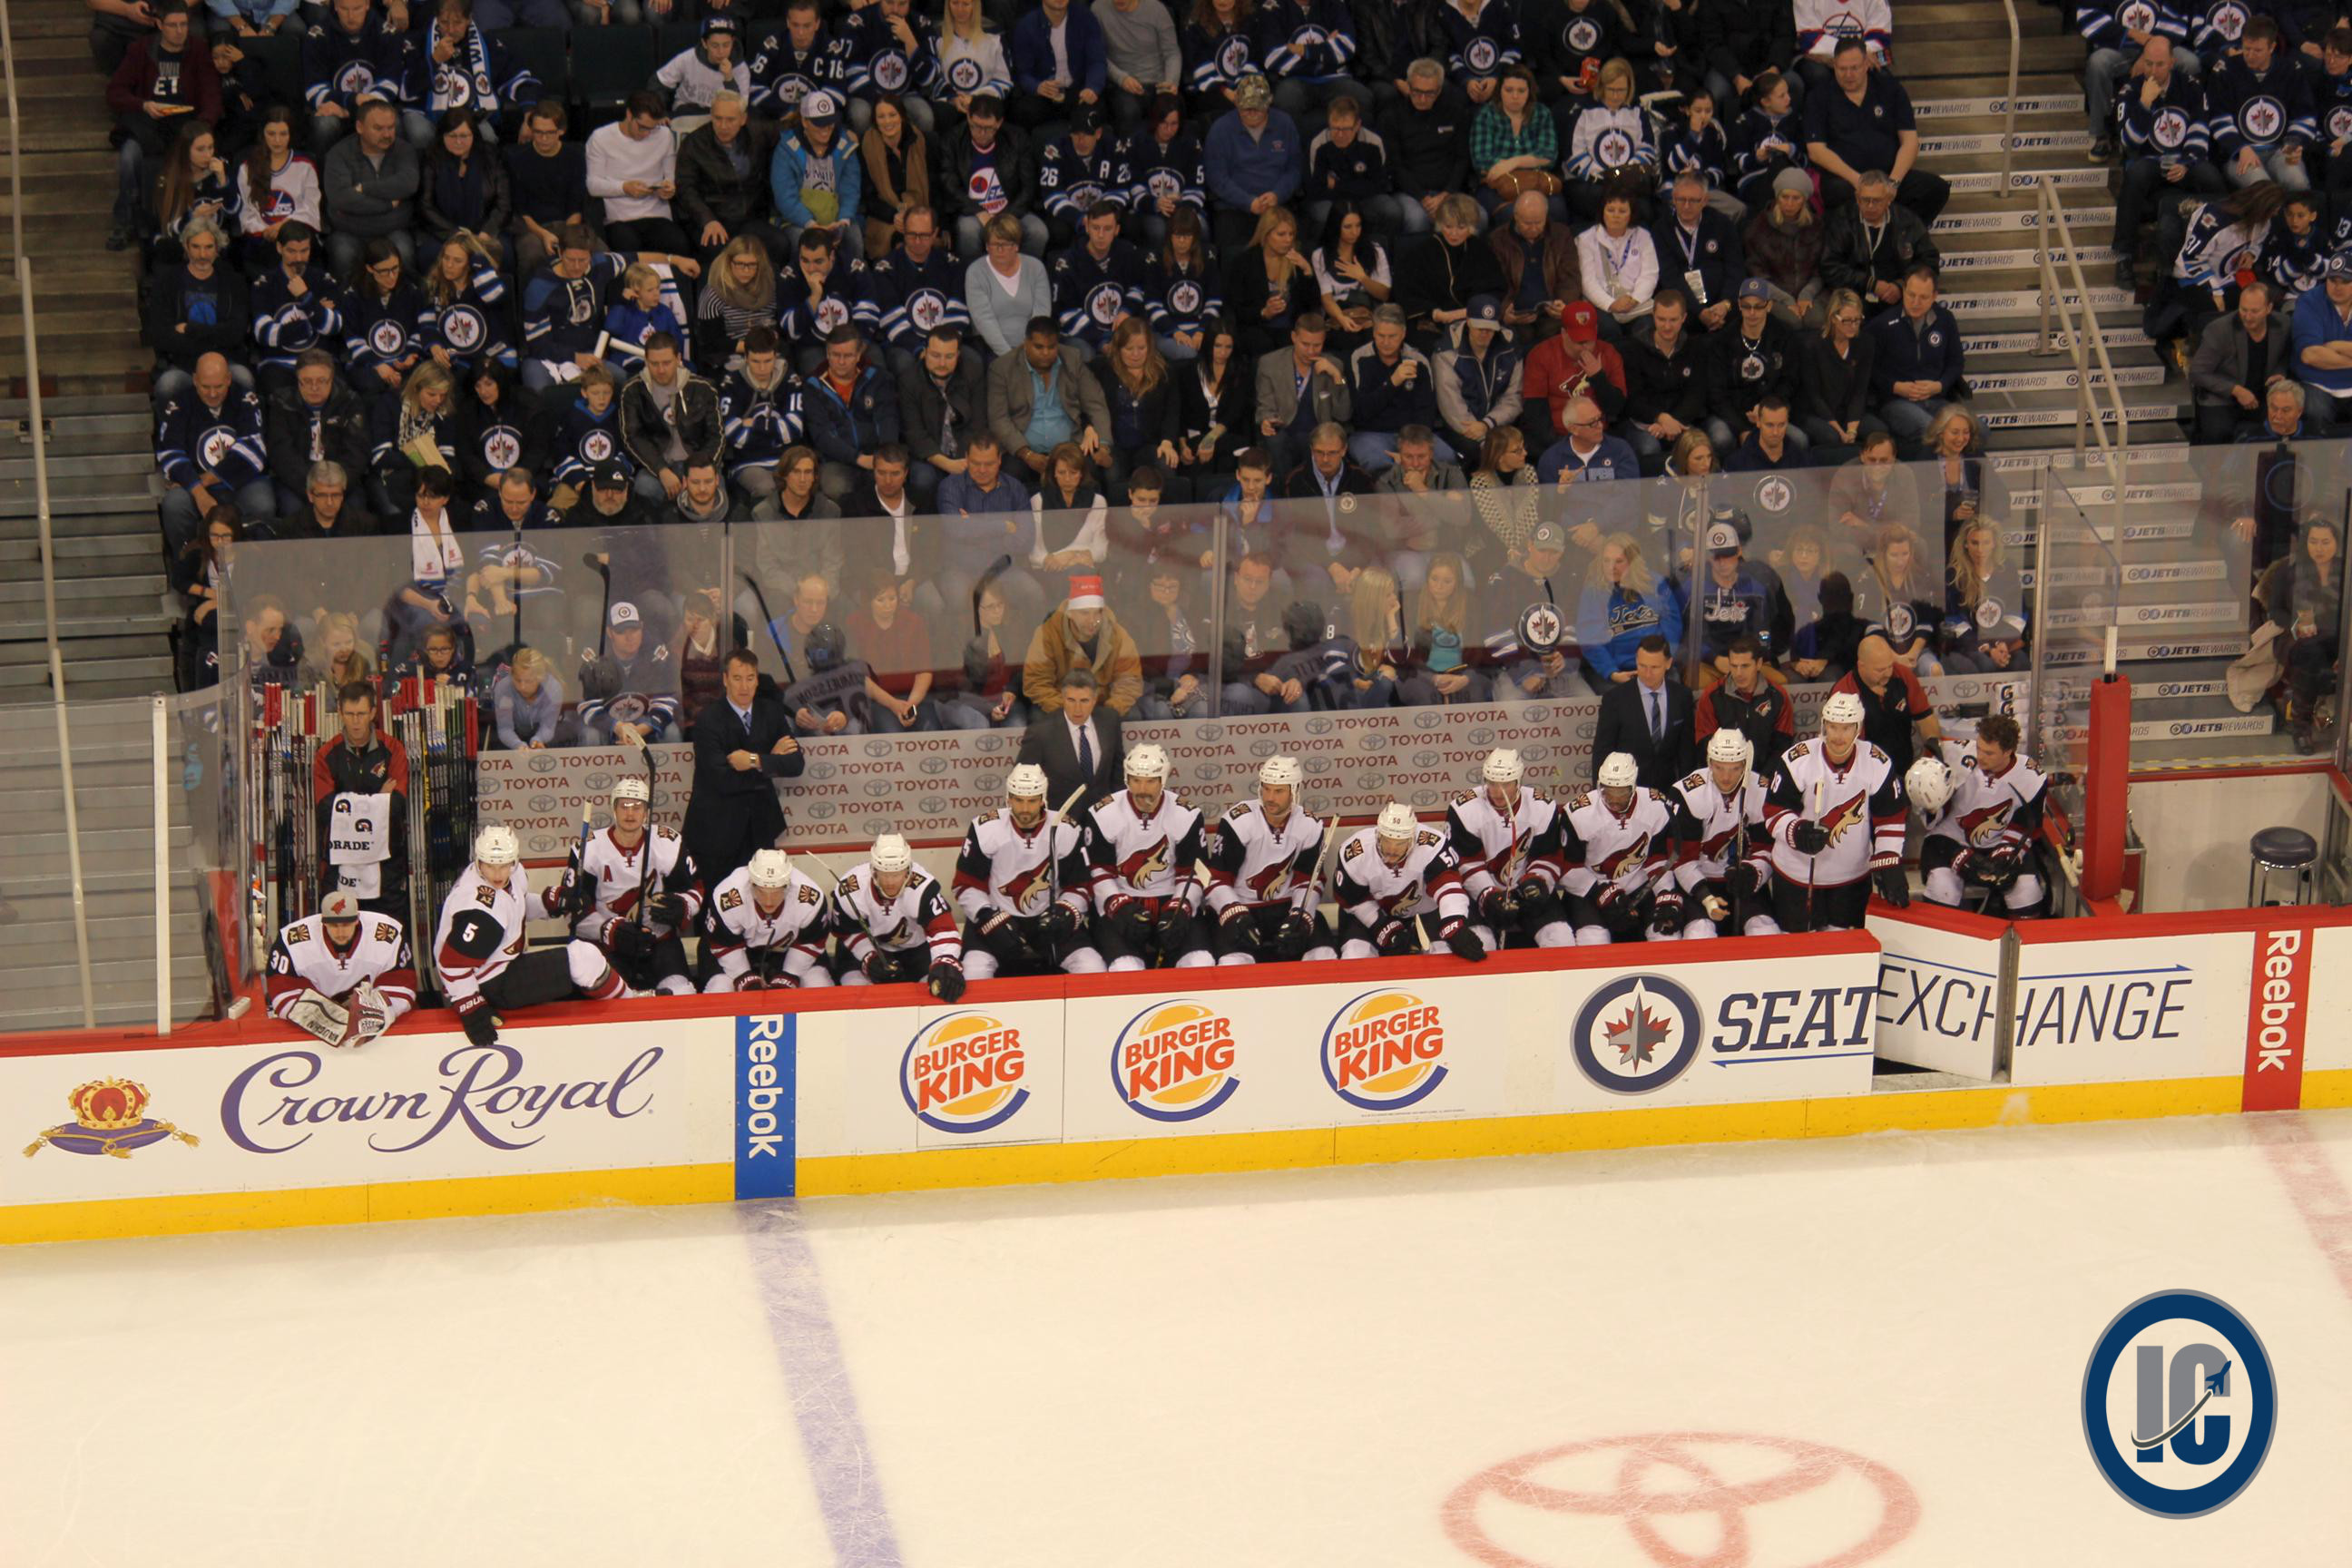 Coyotes bench